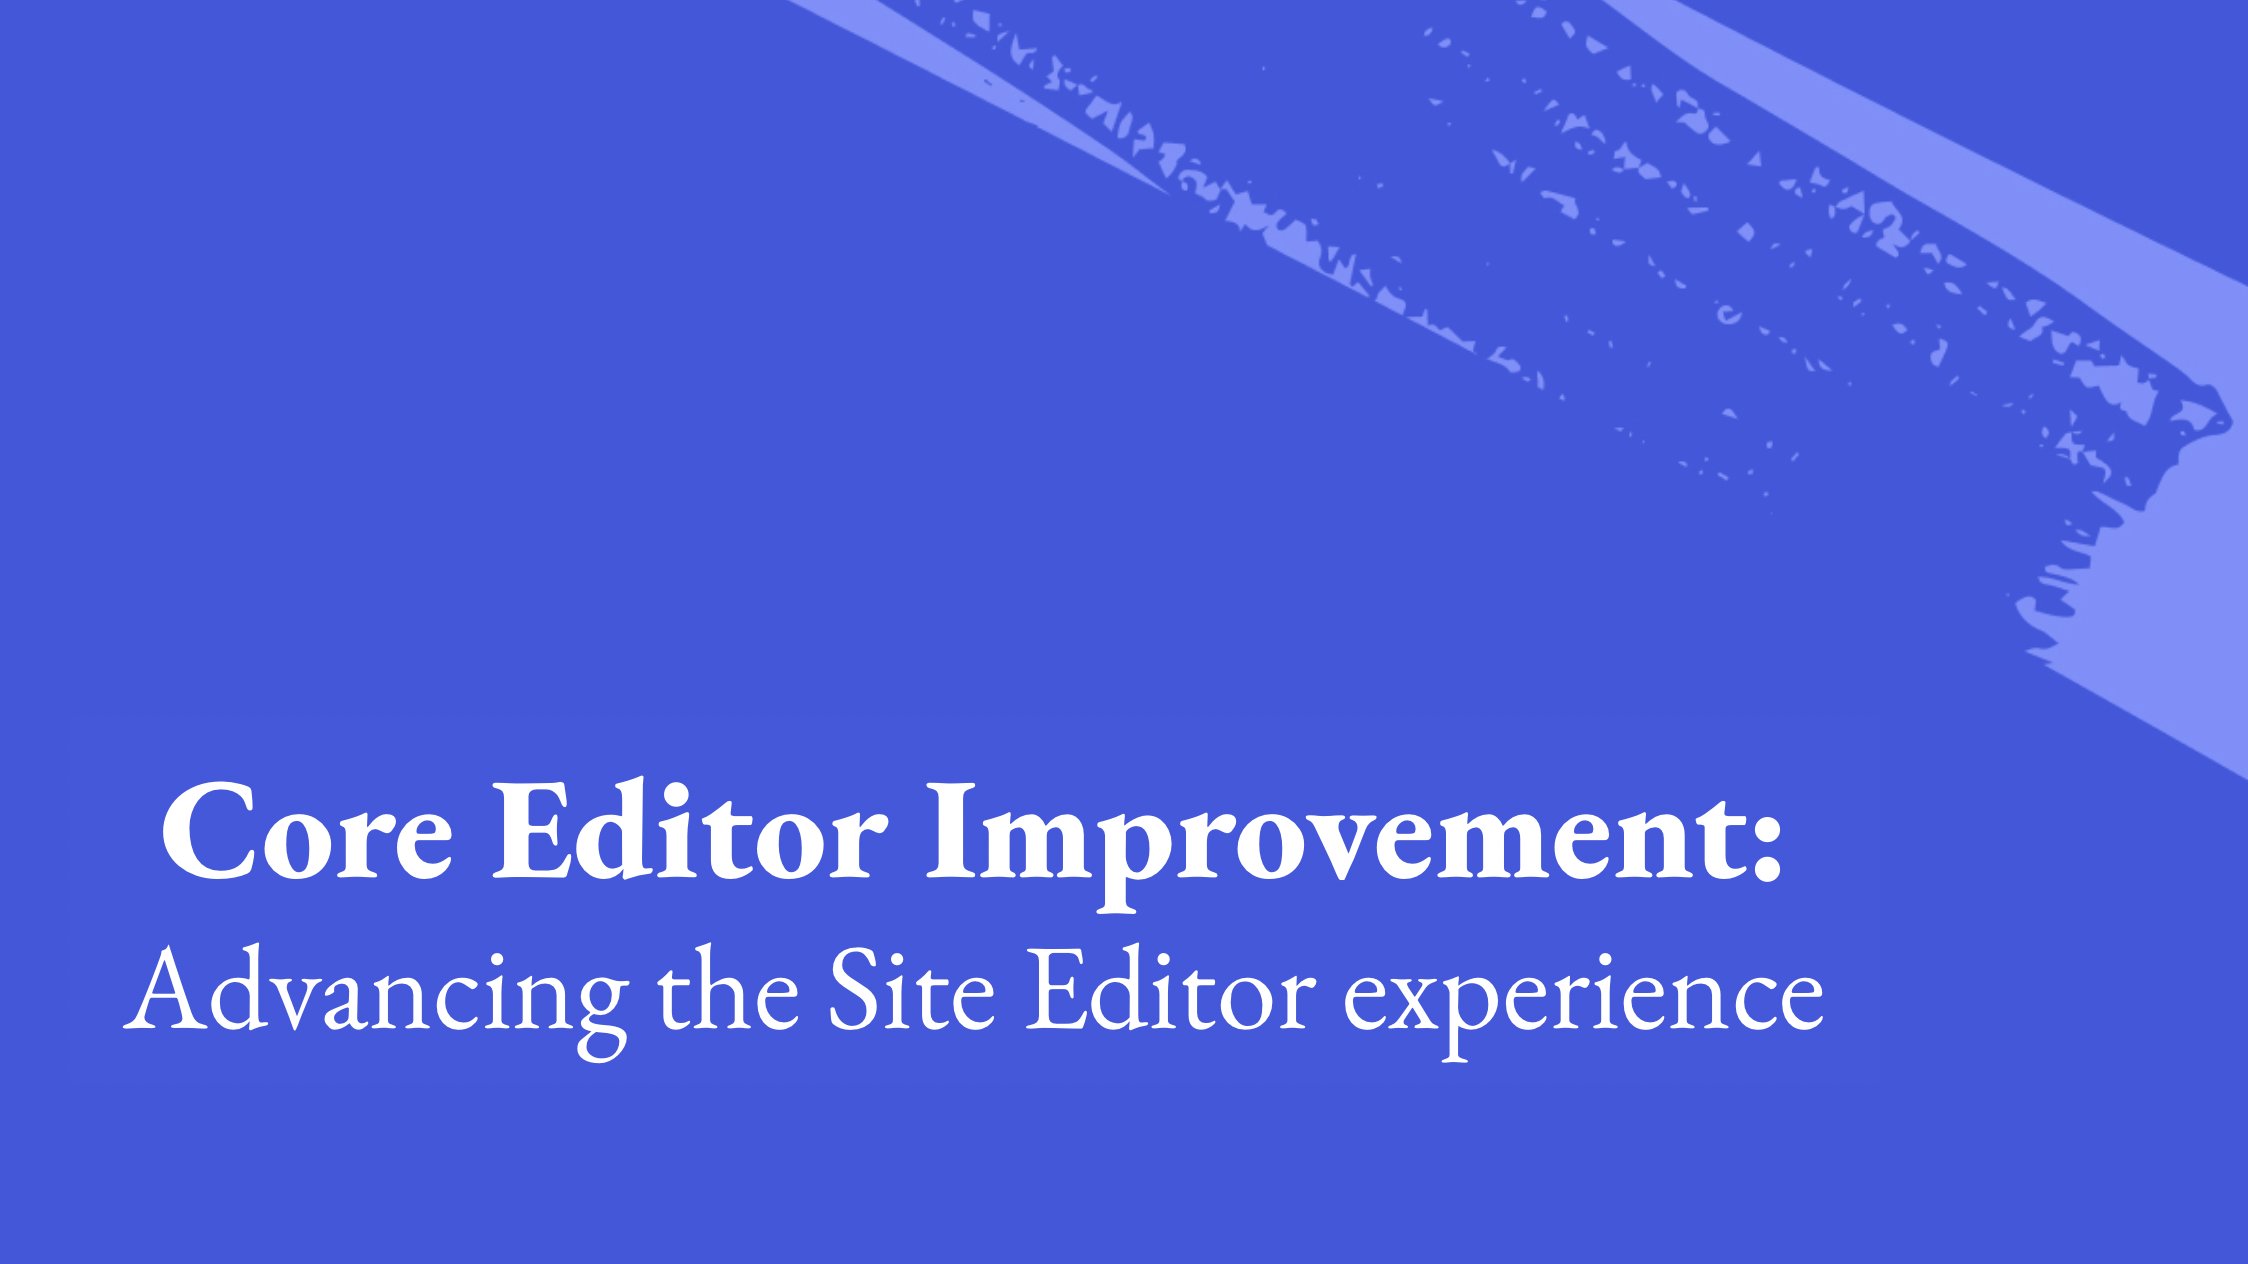 Core Editor Improvement: Advancing the Site Editor experience on a blue background.